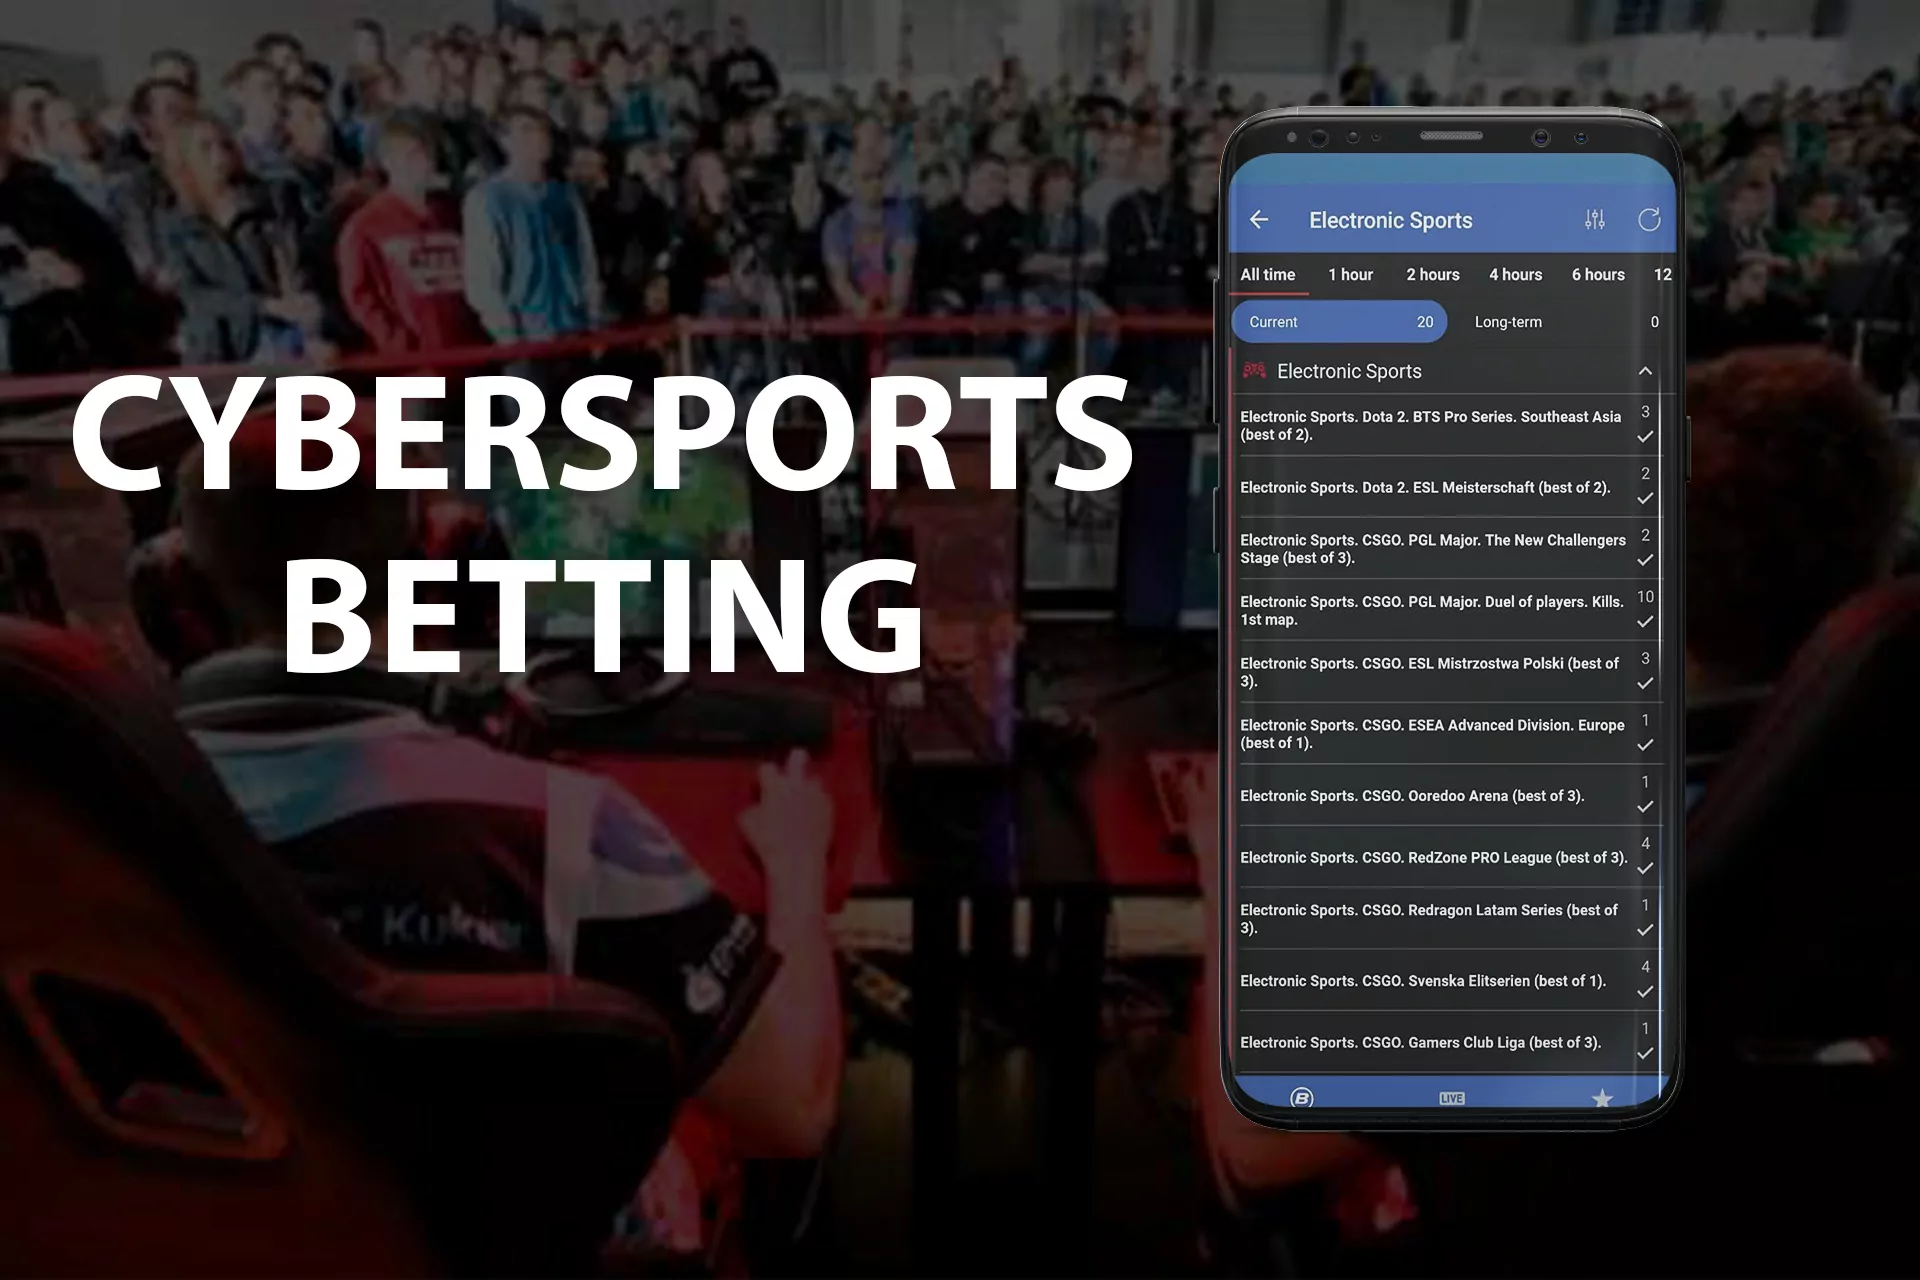 You can watch the broadcasts and bet on cybersports via the Betcity app.